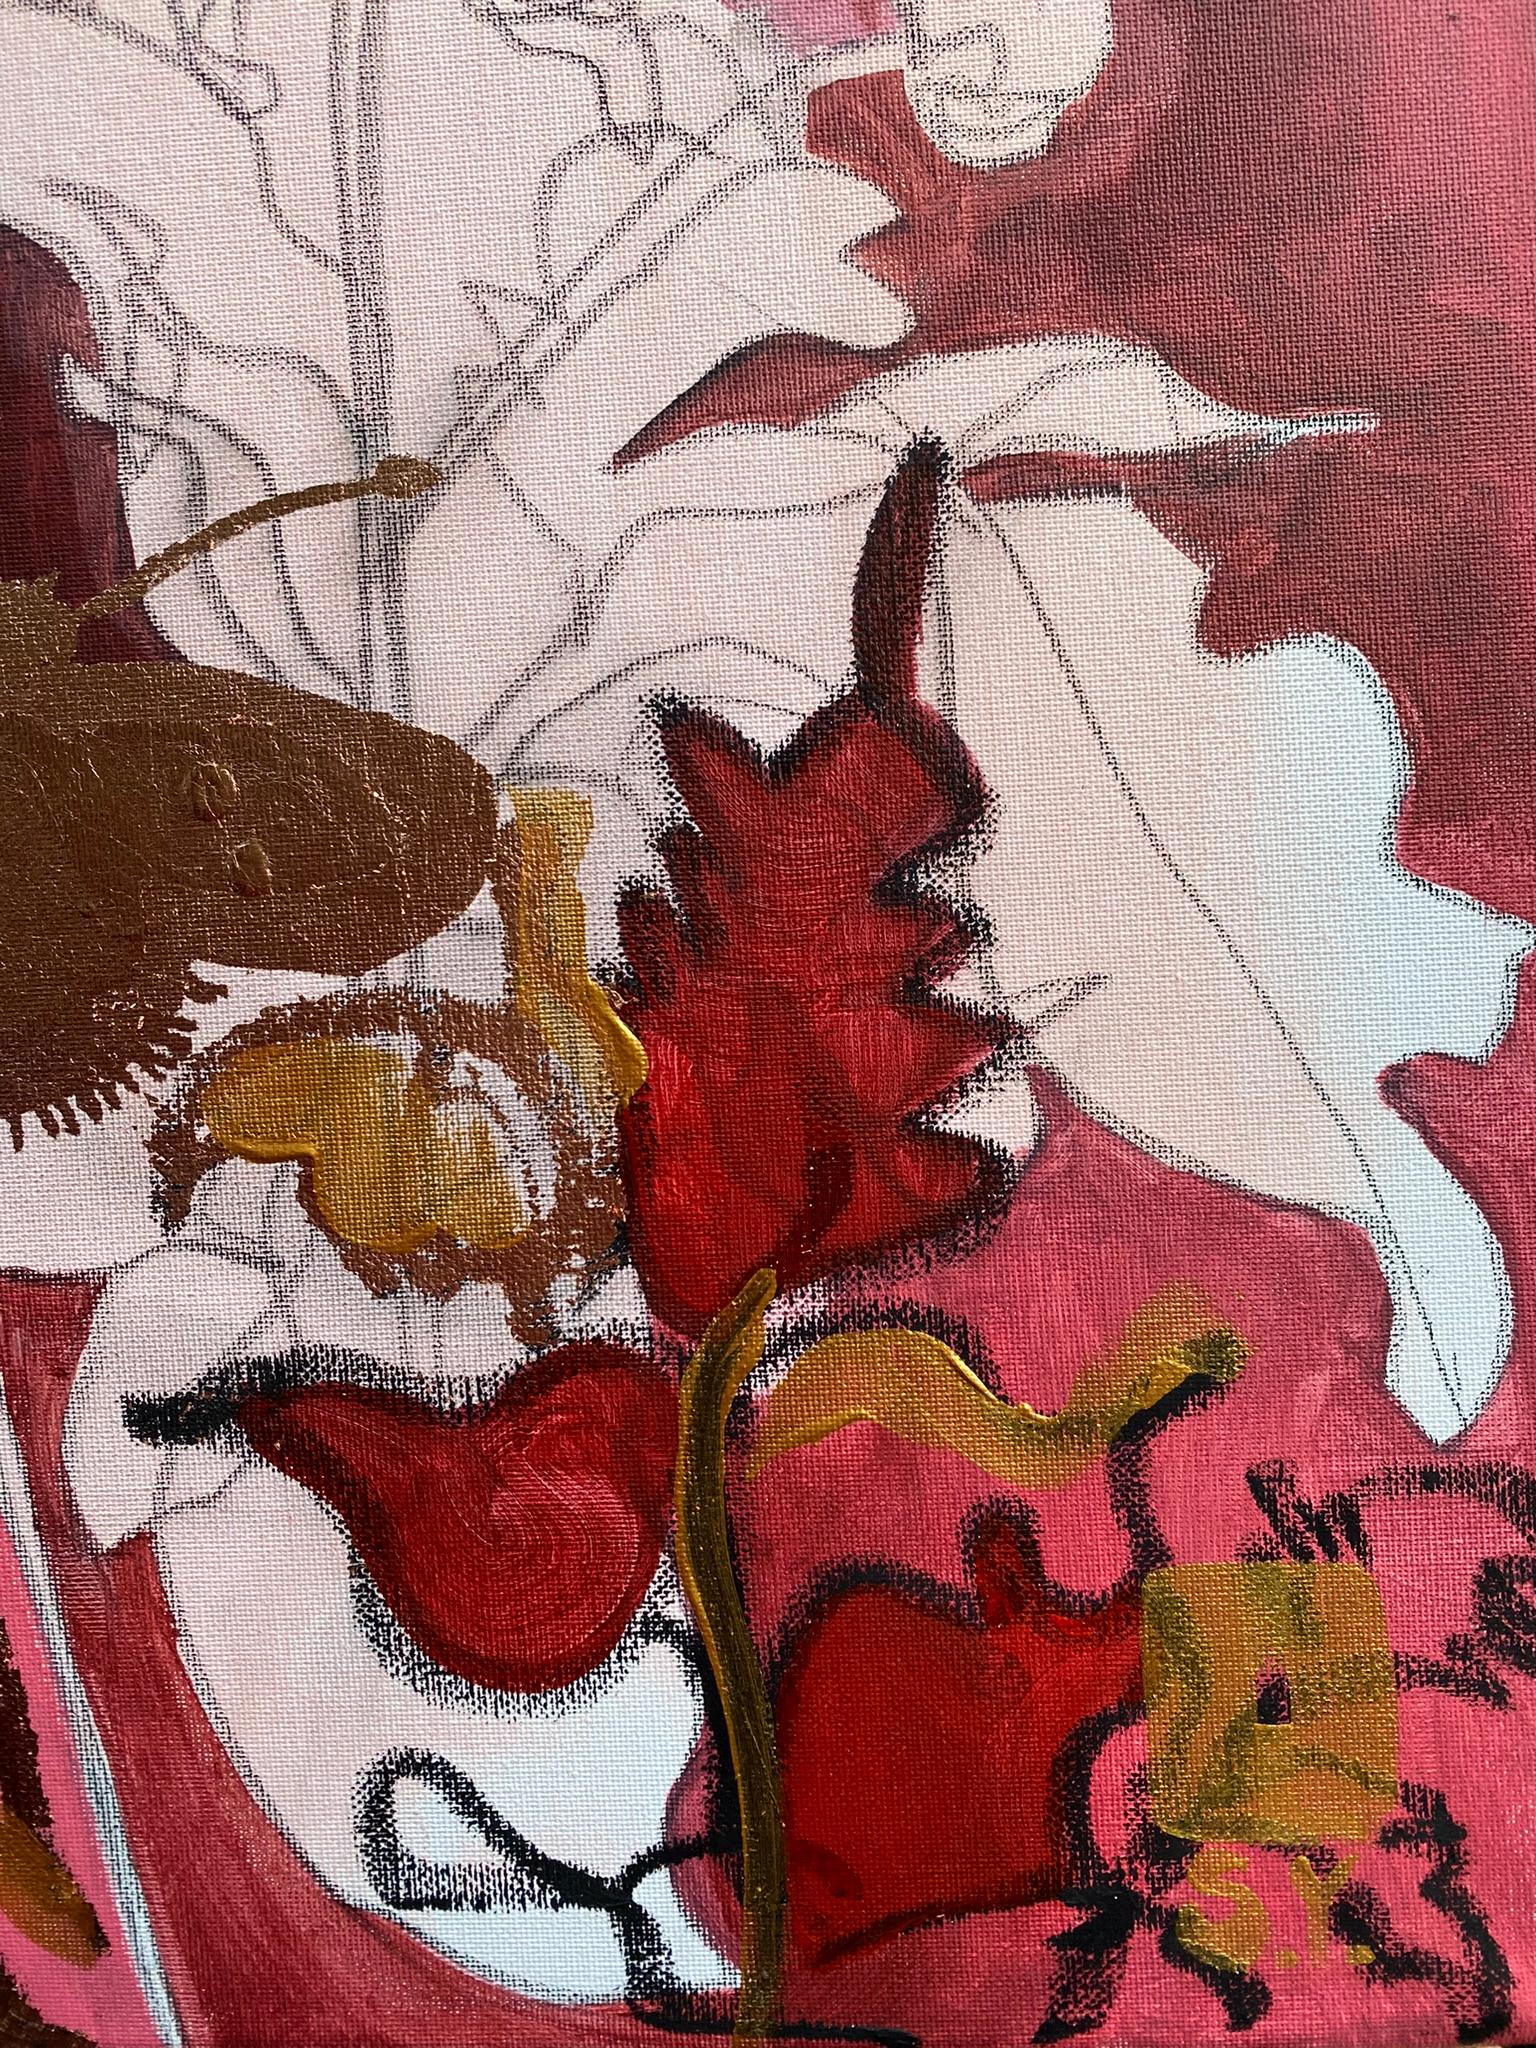 Original-Red Dahlias+Butterfly-Expression-Abstract-Gold leaf-UK Awarded Artist 4